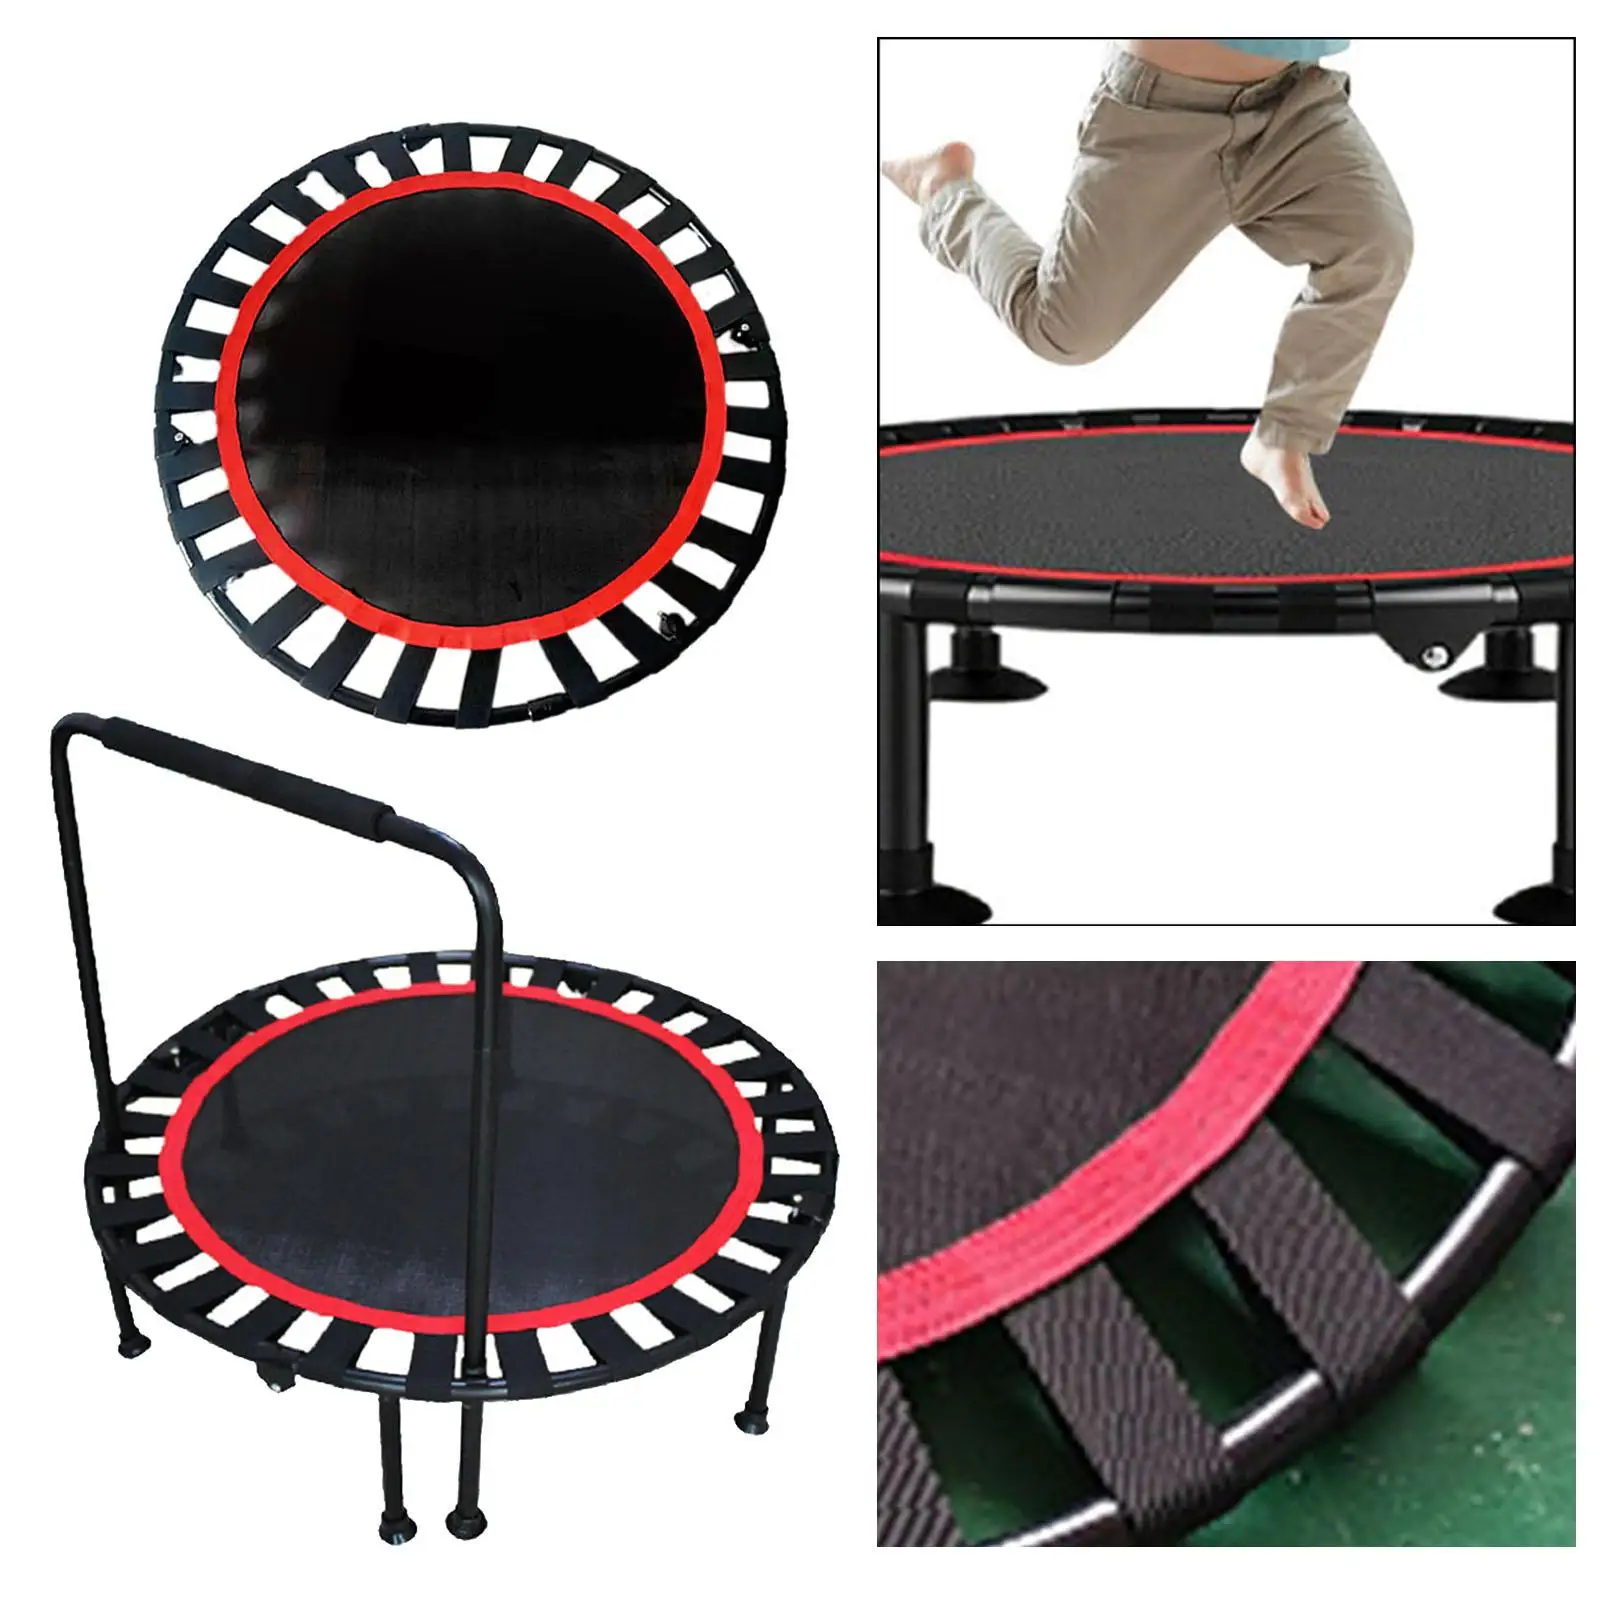 Premium Jumping Mat Long Lasting Birthday Gifts Play Exercise Safety Toy Trampoline for Kids Boy Girl Children Yard Toddler